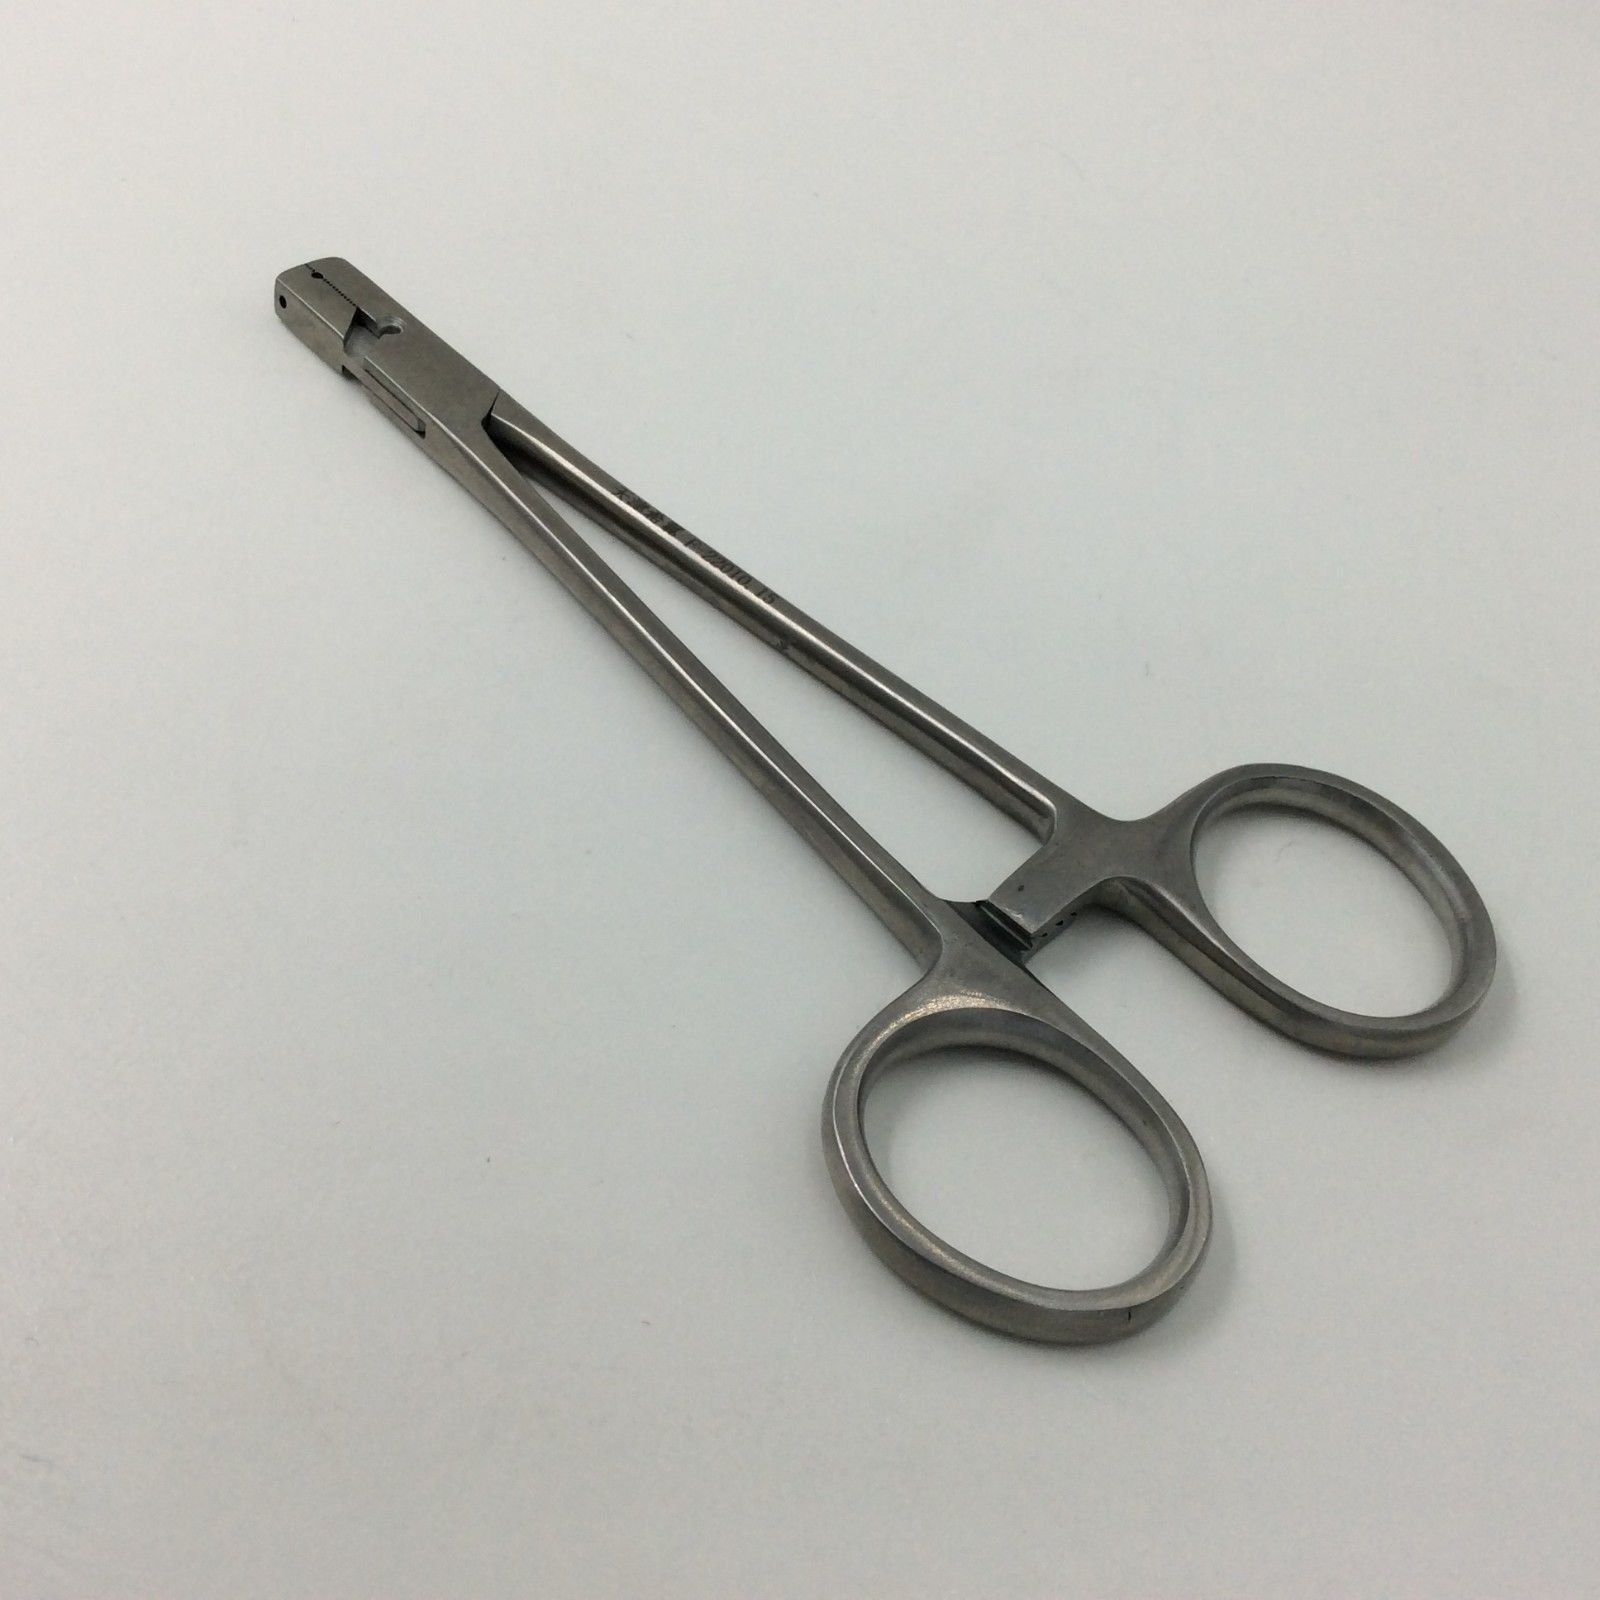 Orthopedic Cerclage Wire Twister wire Cutter Wire Ligature Forceps  Stainless steel Veterinary orthopedic surgical instrument - AliExpress